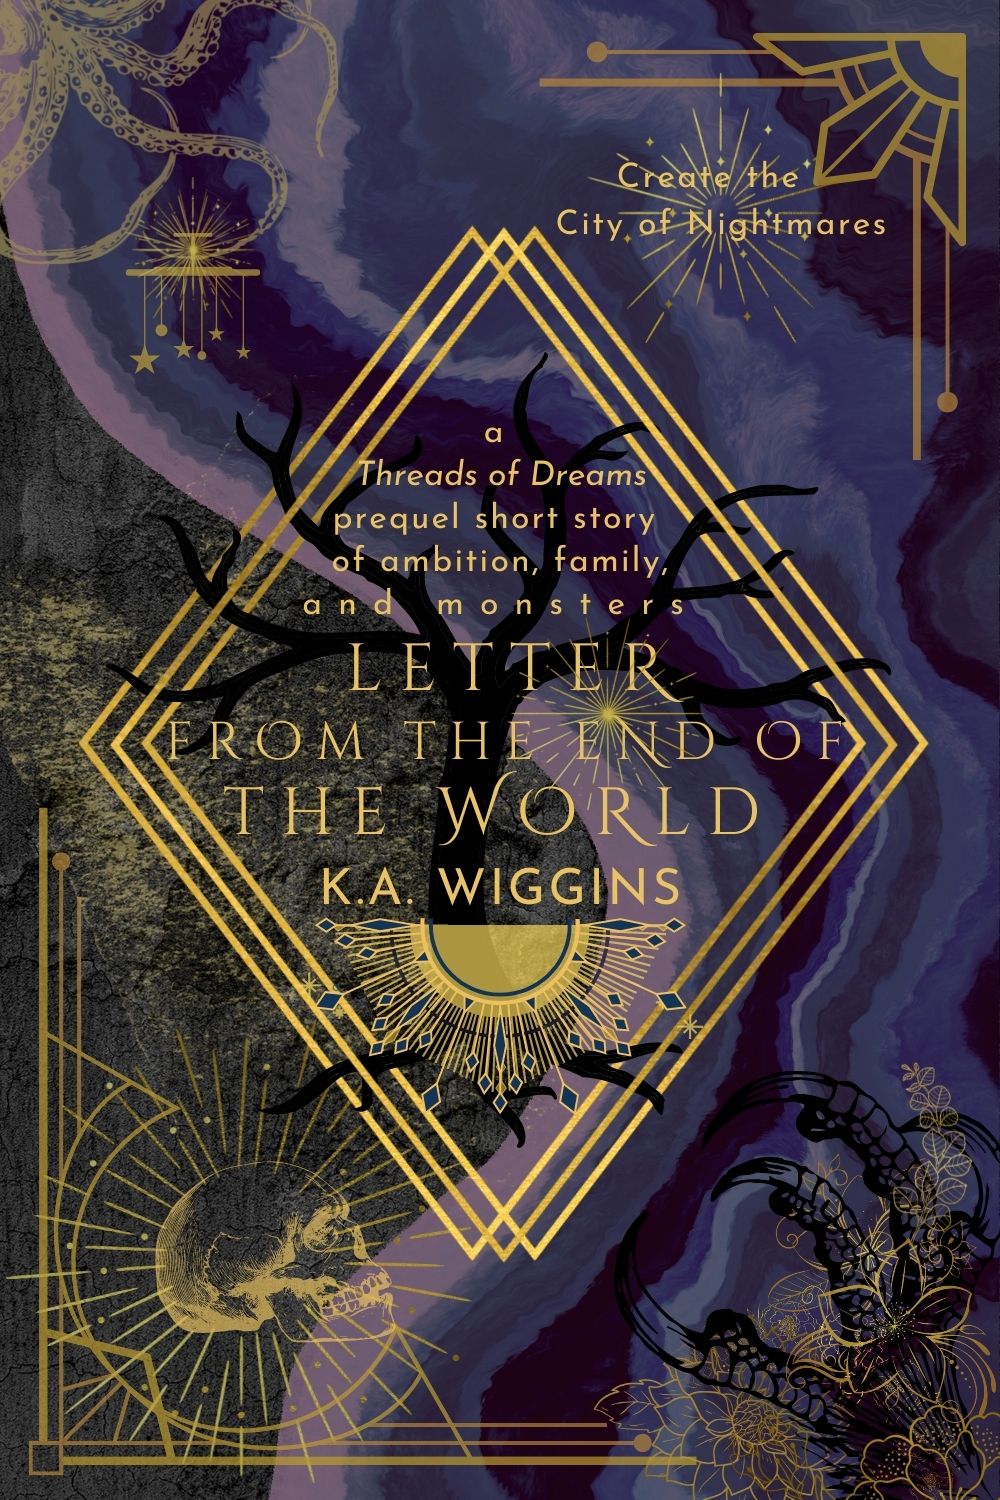 Prequel short story Letter From the End of the World ebook cover by K.A. Wiggins